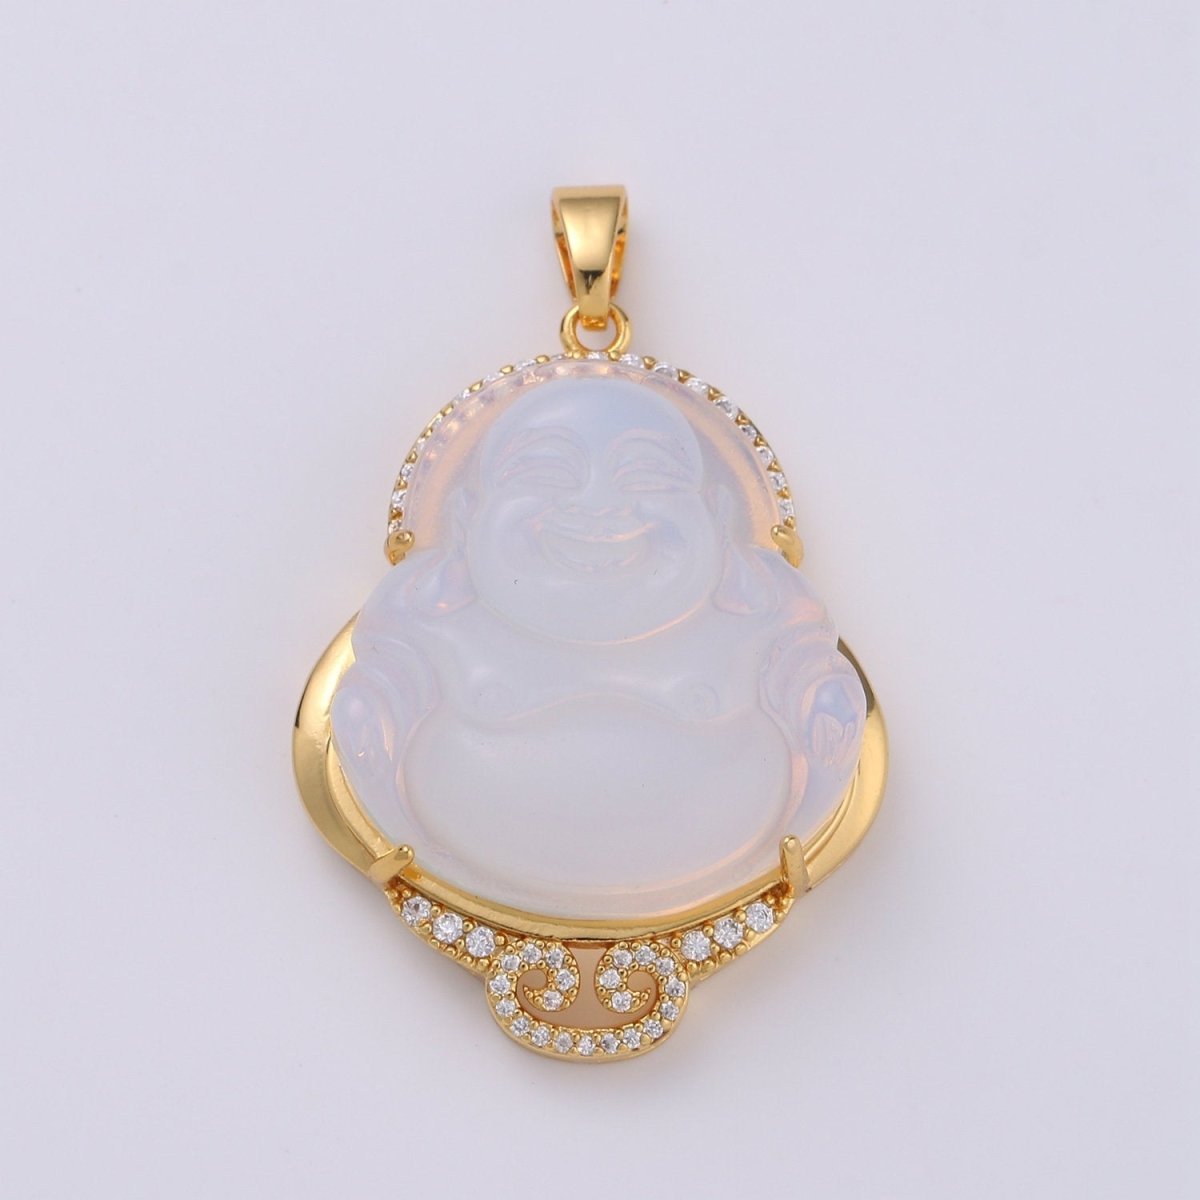 Cat's eye Buddha Cubic Pendant 24K Gold Filled Buddha Pendant Green Cat's Eye Buddha Charm CubicBuddha Necklace for Religious Jewelry Supply O-165 O-166 - DLUXCA